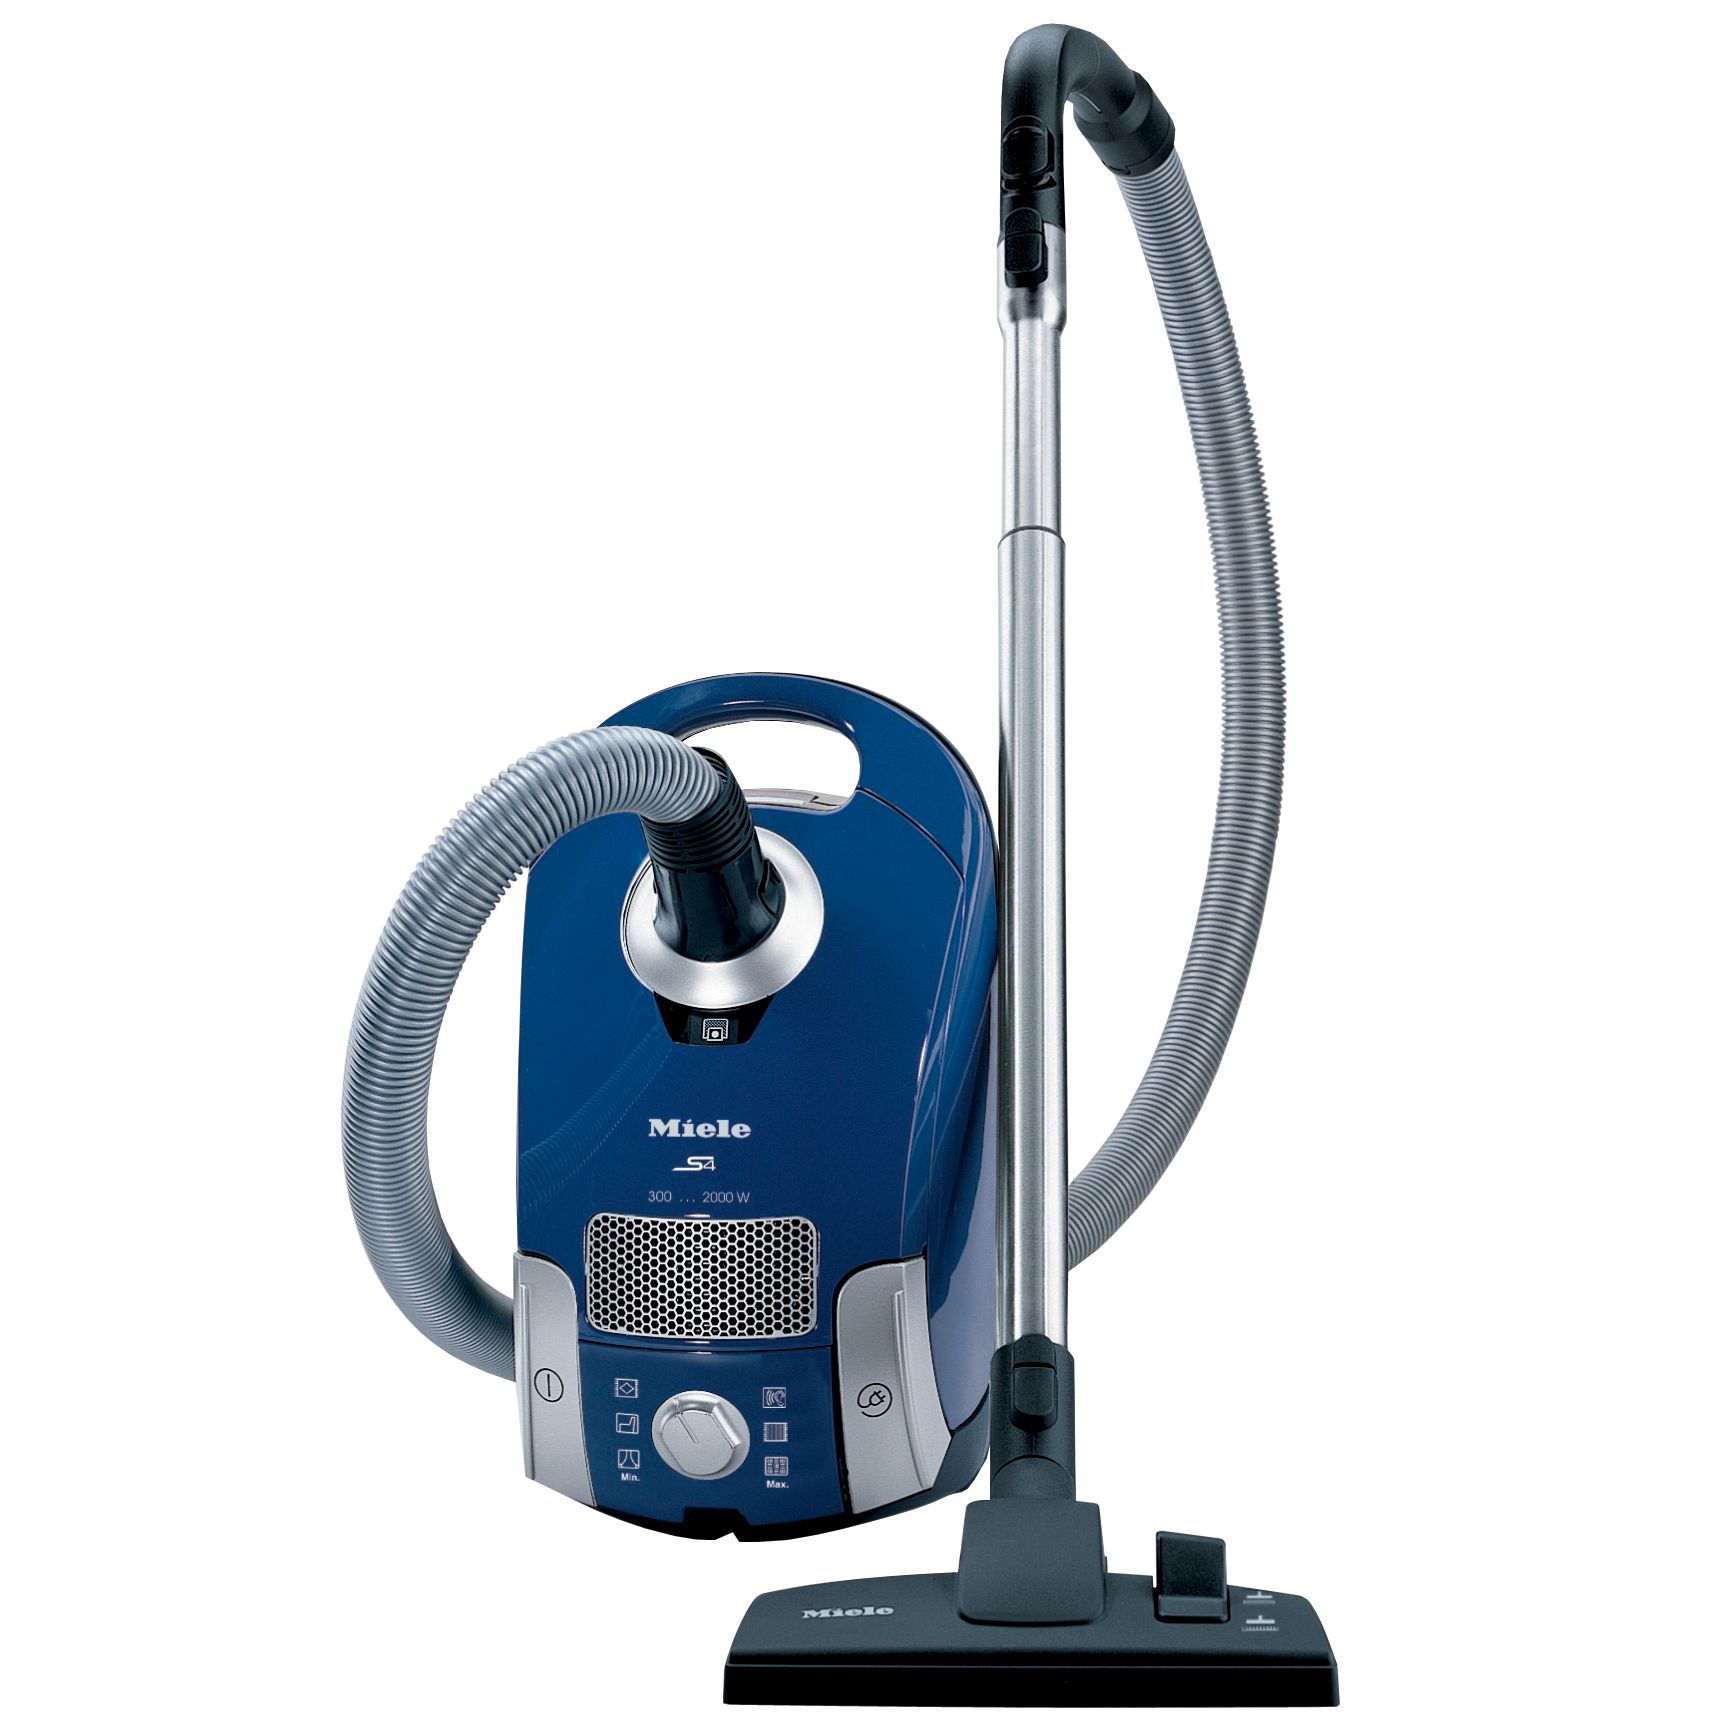 Miele S4212 Compact Plus Cylinder Cleaner at JohnLewis